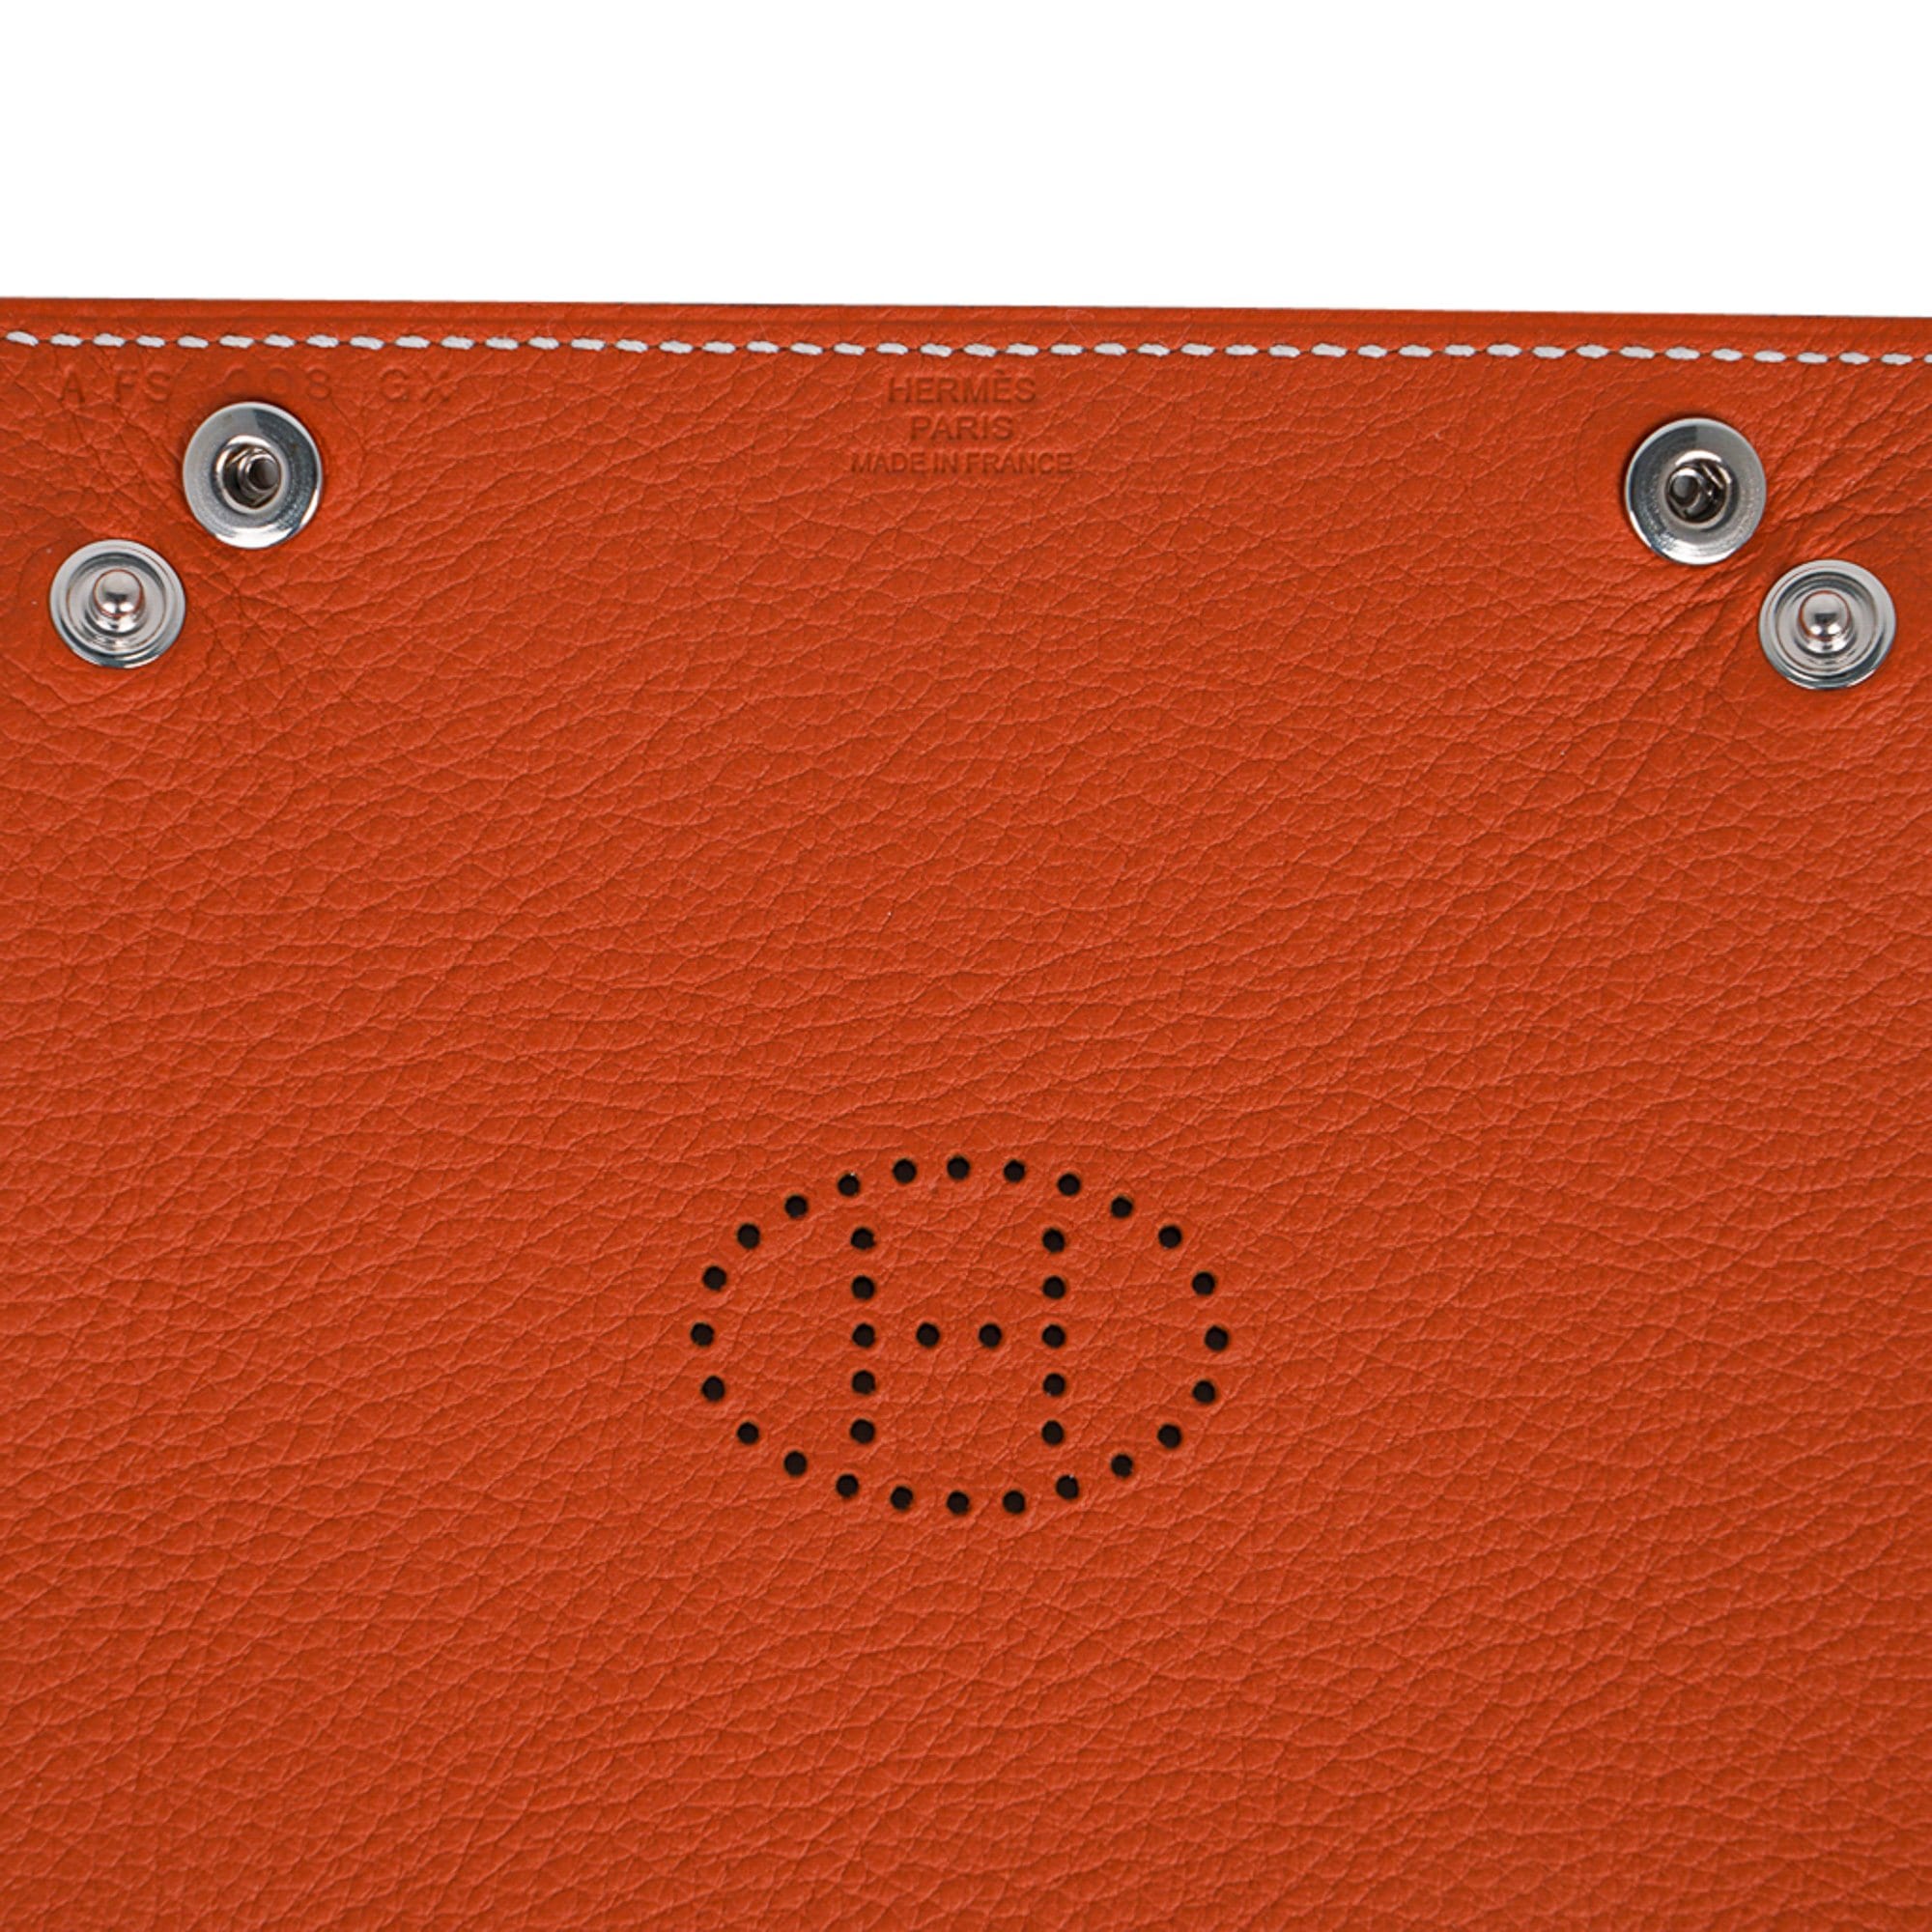 hermes change tray leather